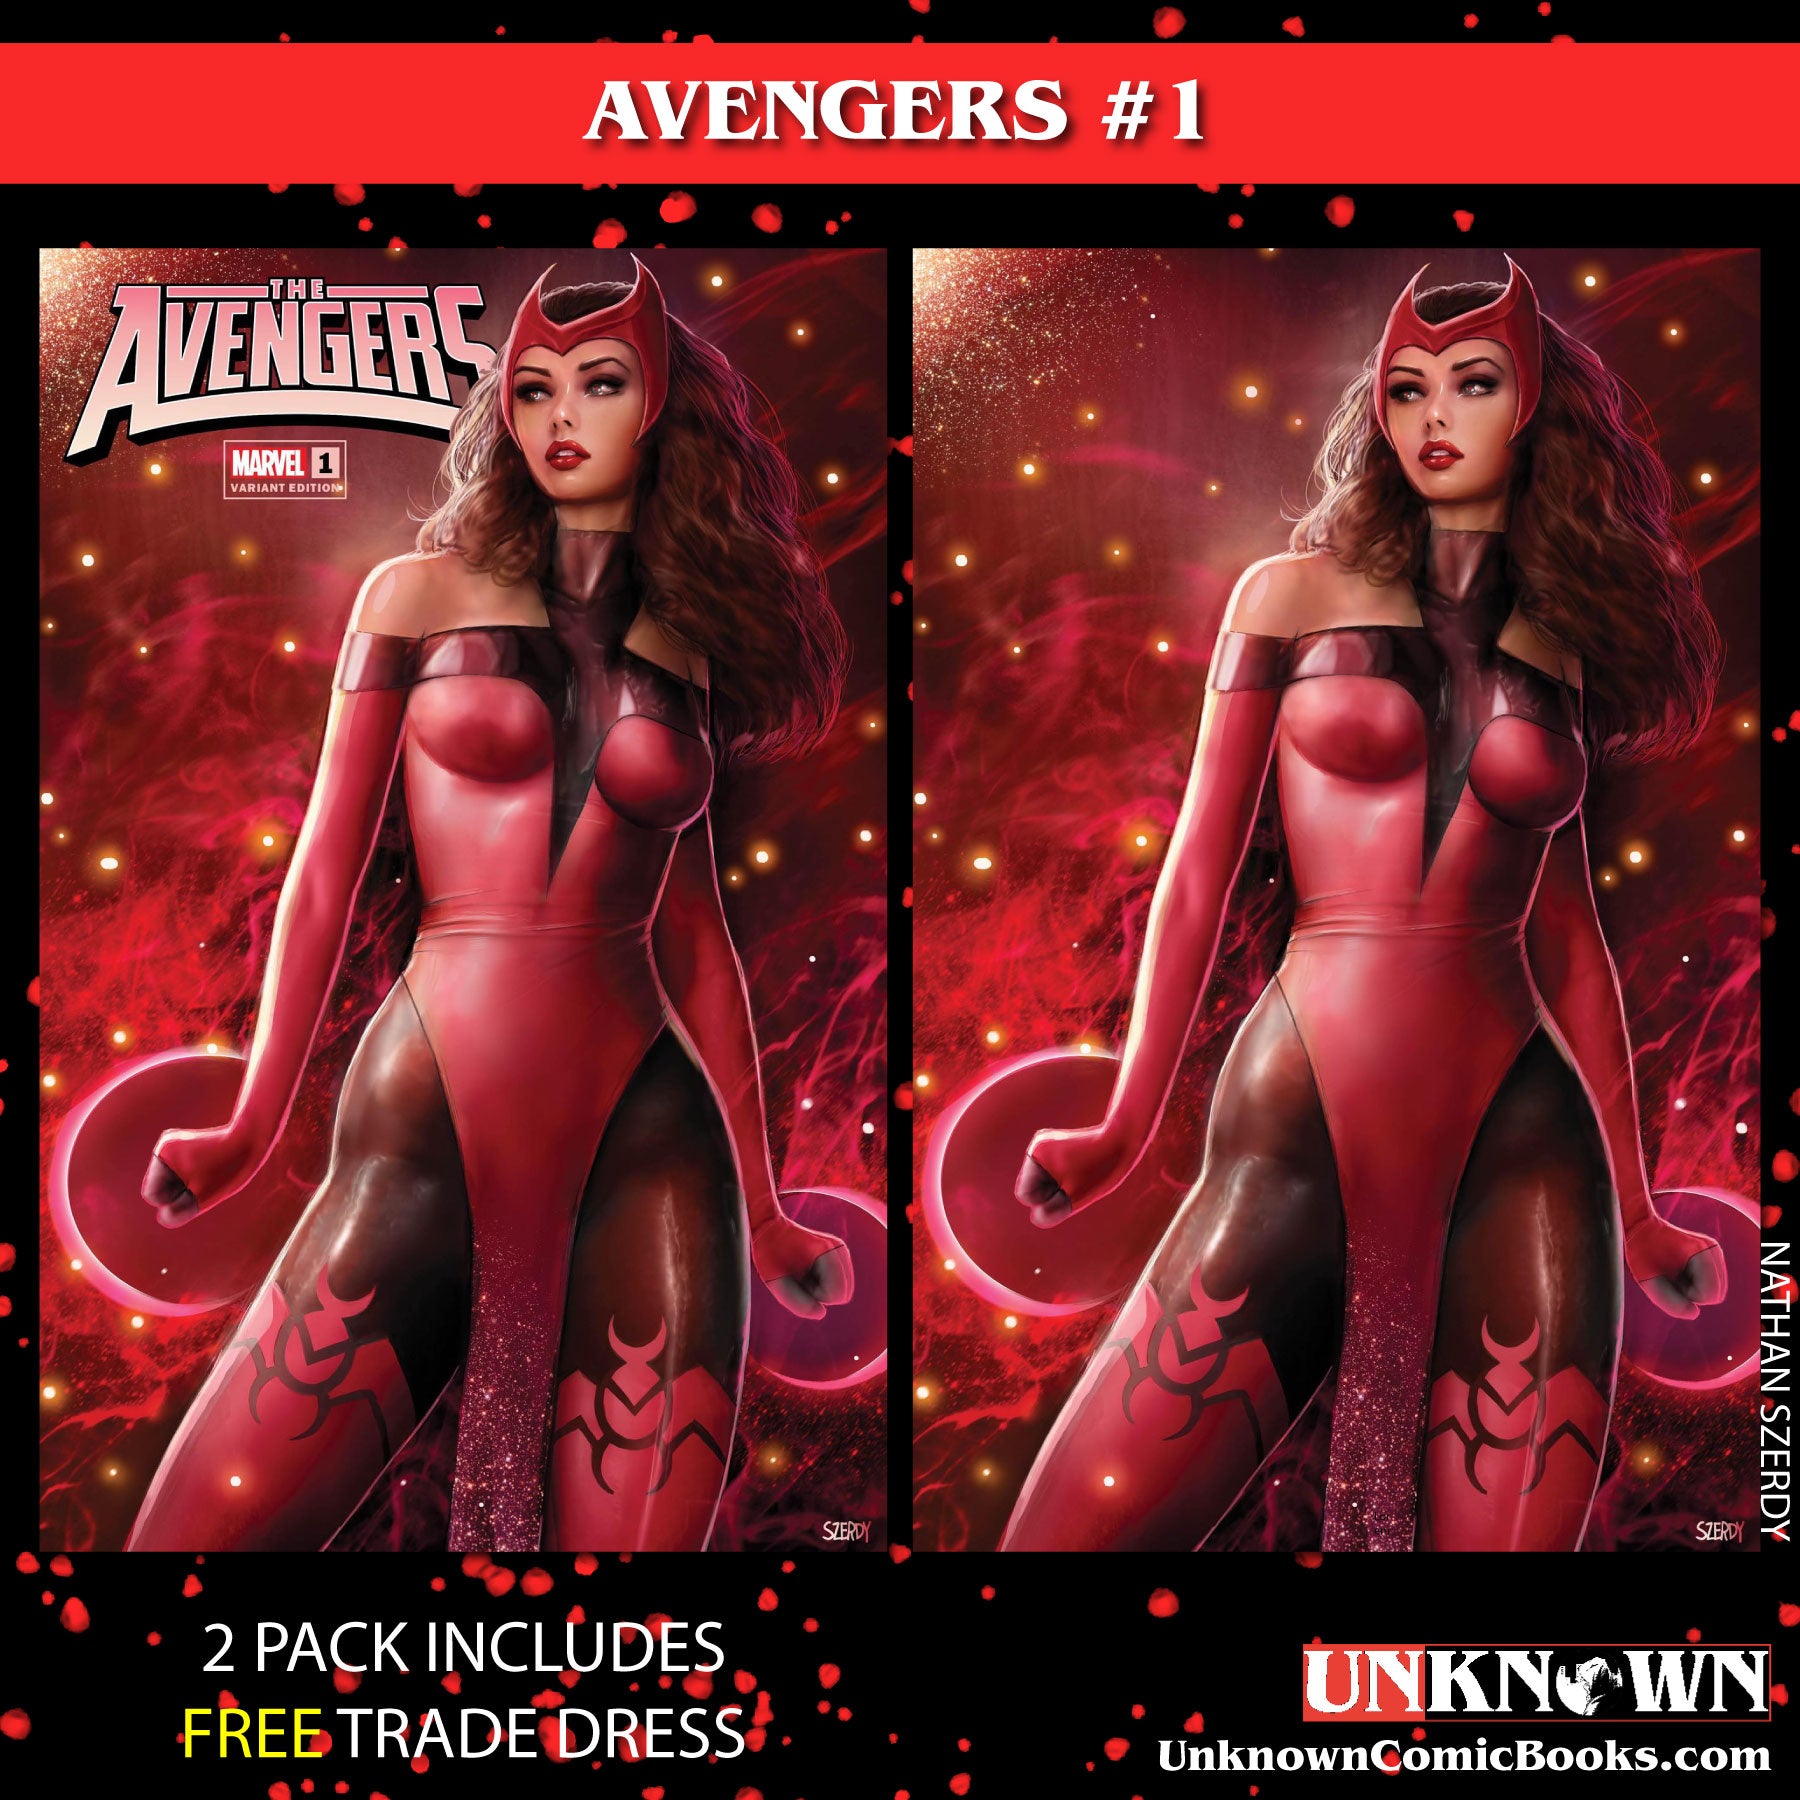 [2 PACK] **FREE TRADE DRESS** AVENGERS #1 UNKNOWN COMICS NATHAN SZERDY EXCLUSIVE VAR (05/17/2023)